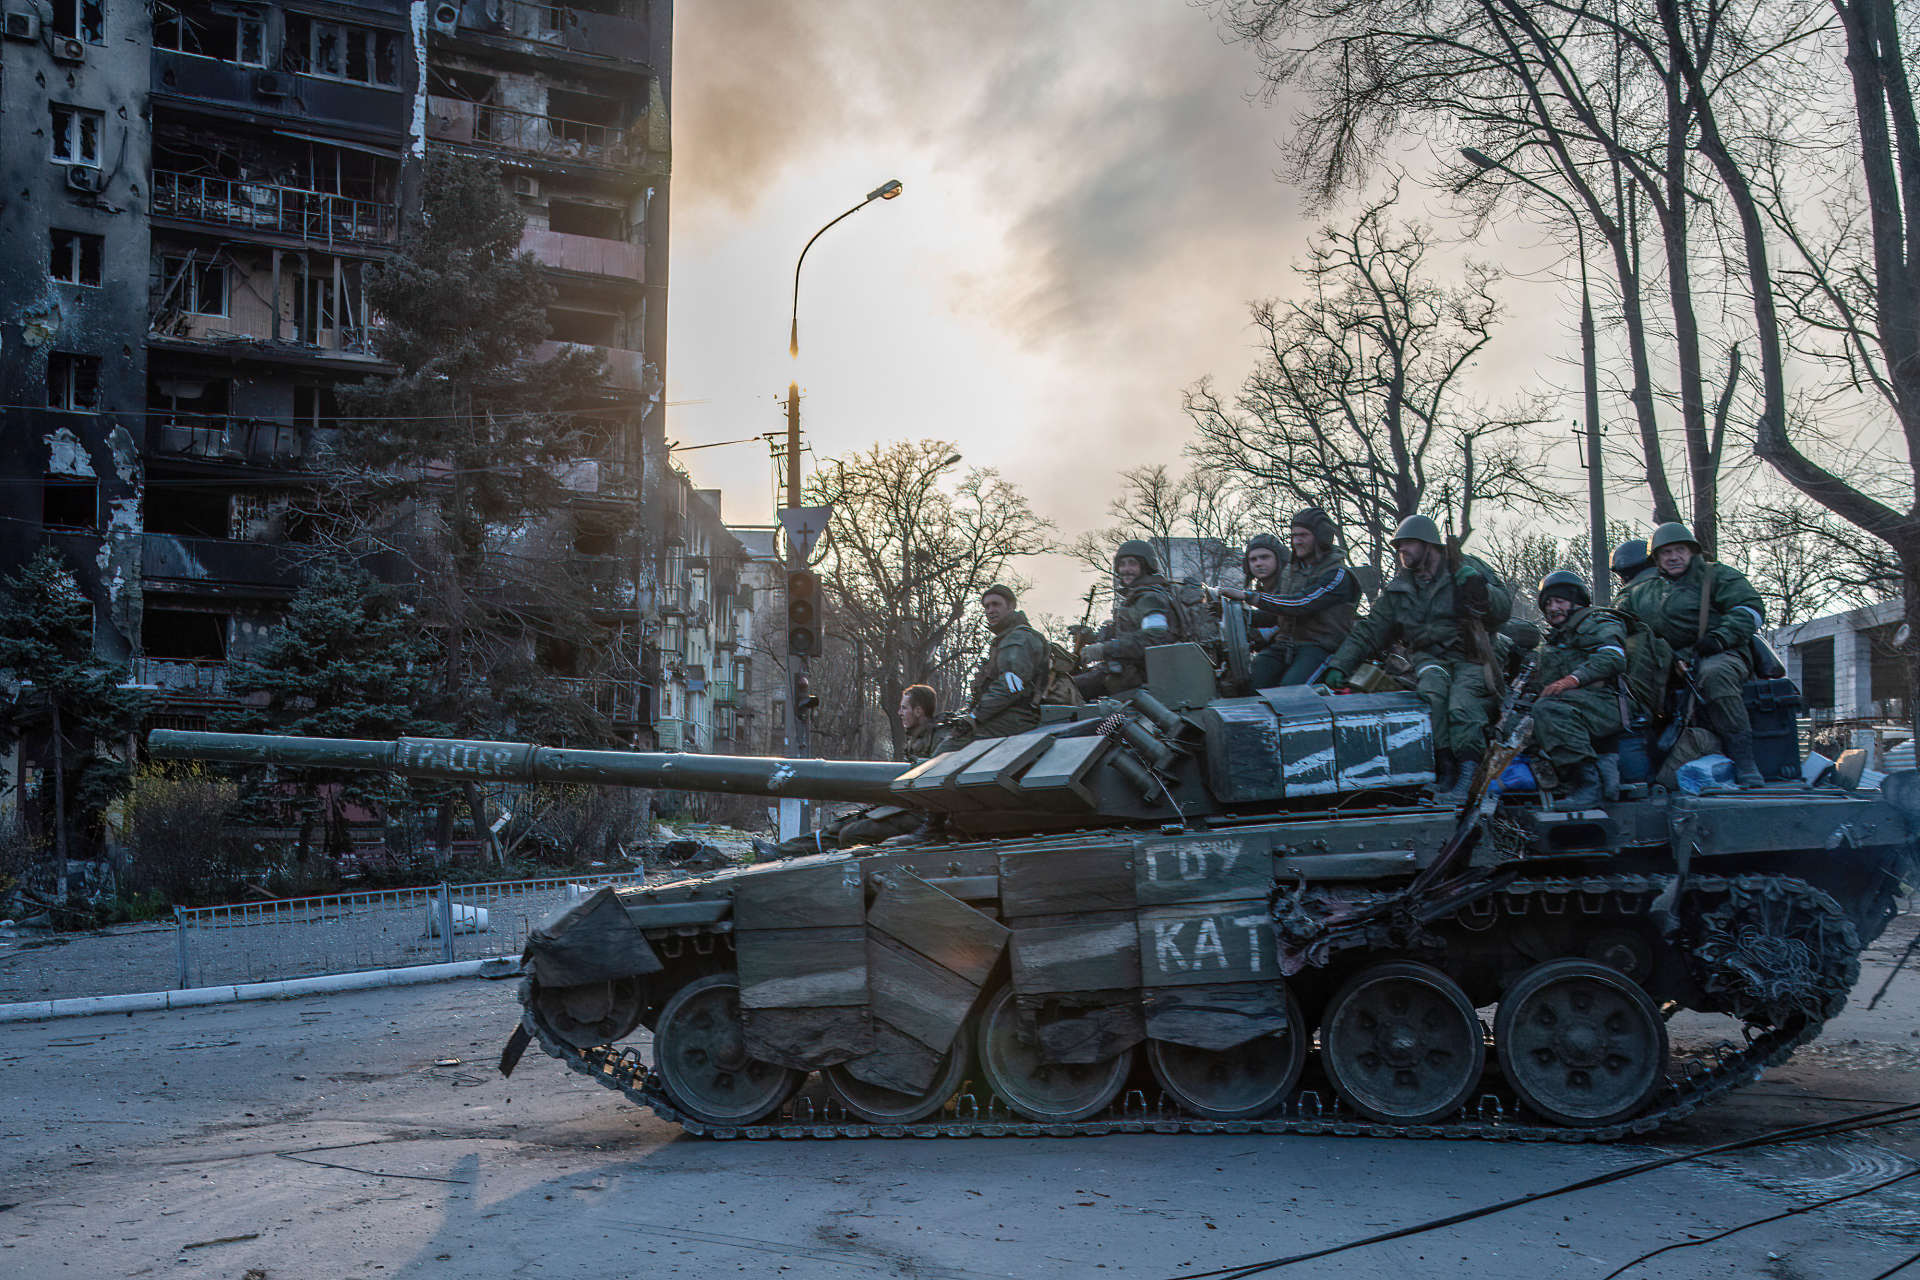 April 16, 2022, Mariupol, Ukraine: A DPR tank in a burning Mariupol neighborhood drives towards the Azovstal plant- one of the final pockets of Ukrainian resistance. The battle between Russian / Pro Russian forces and the defending Ukrainian forces led by the Azov battalion continues in the port city of Mariupol. (Credit Image: © Maximilian Clarke/SOPA Images via ZUMA Press Wire)